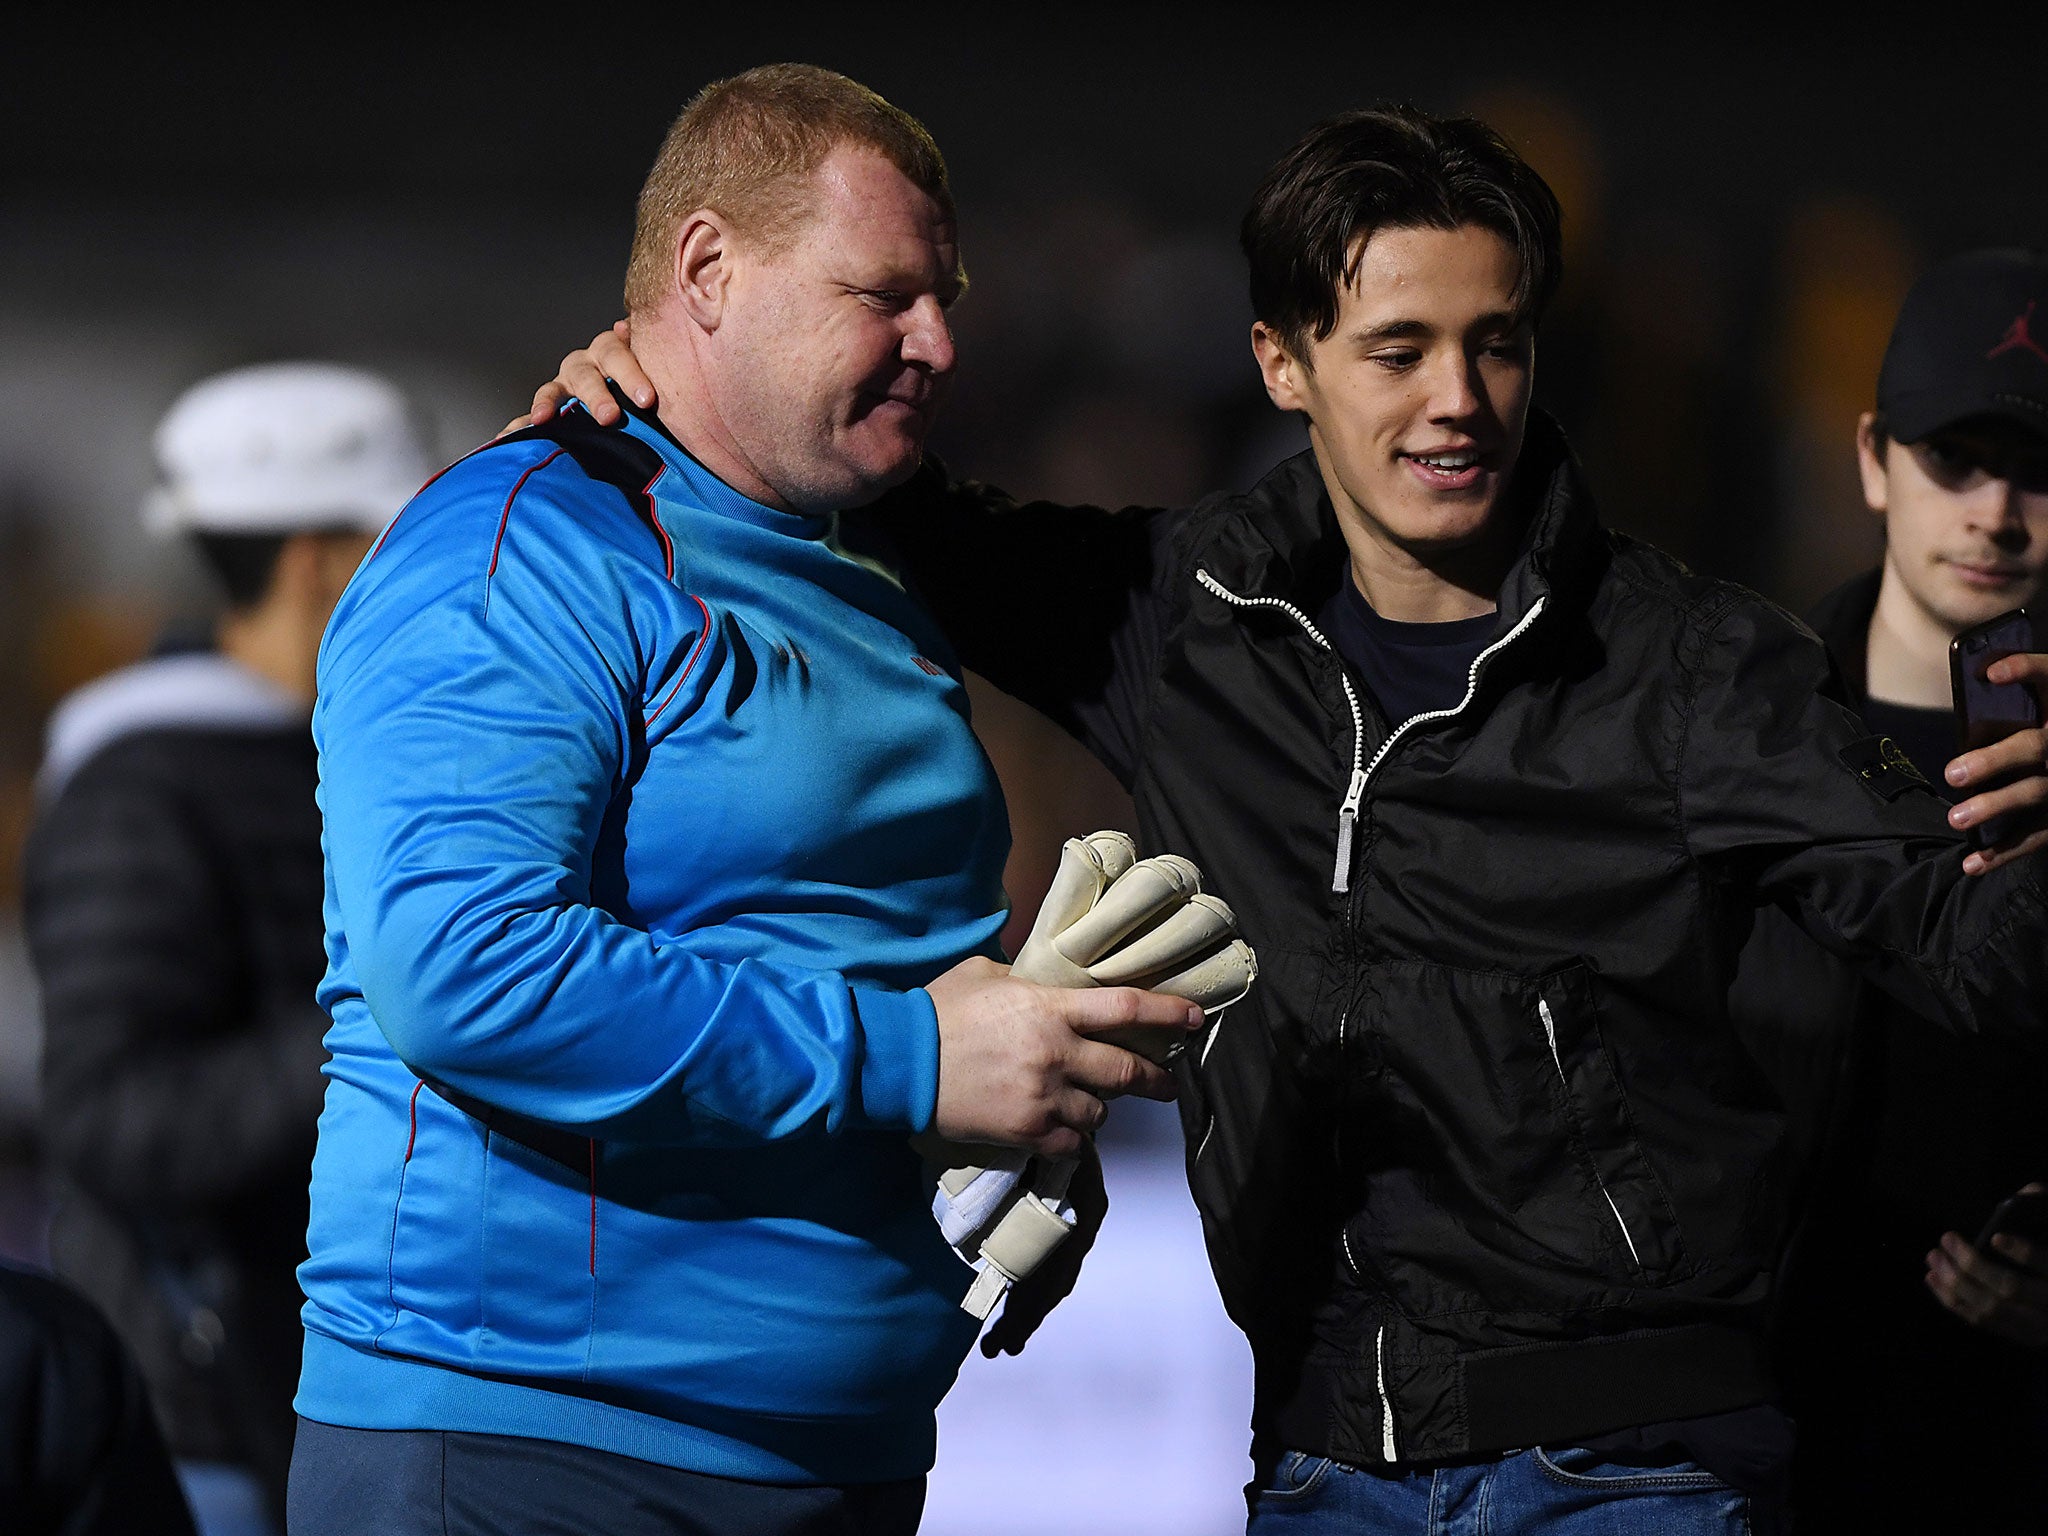 Wayne Shaw resigned from his position at Sutton United after 'piegate'